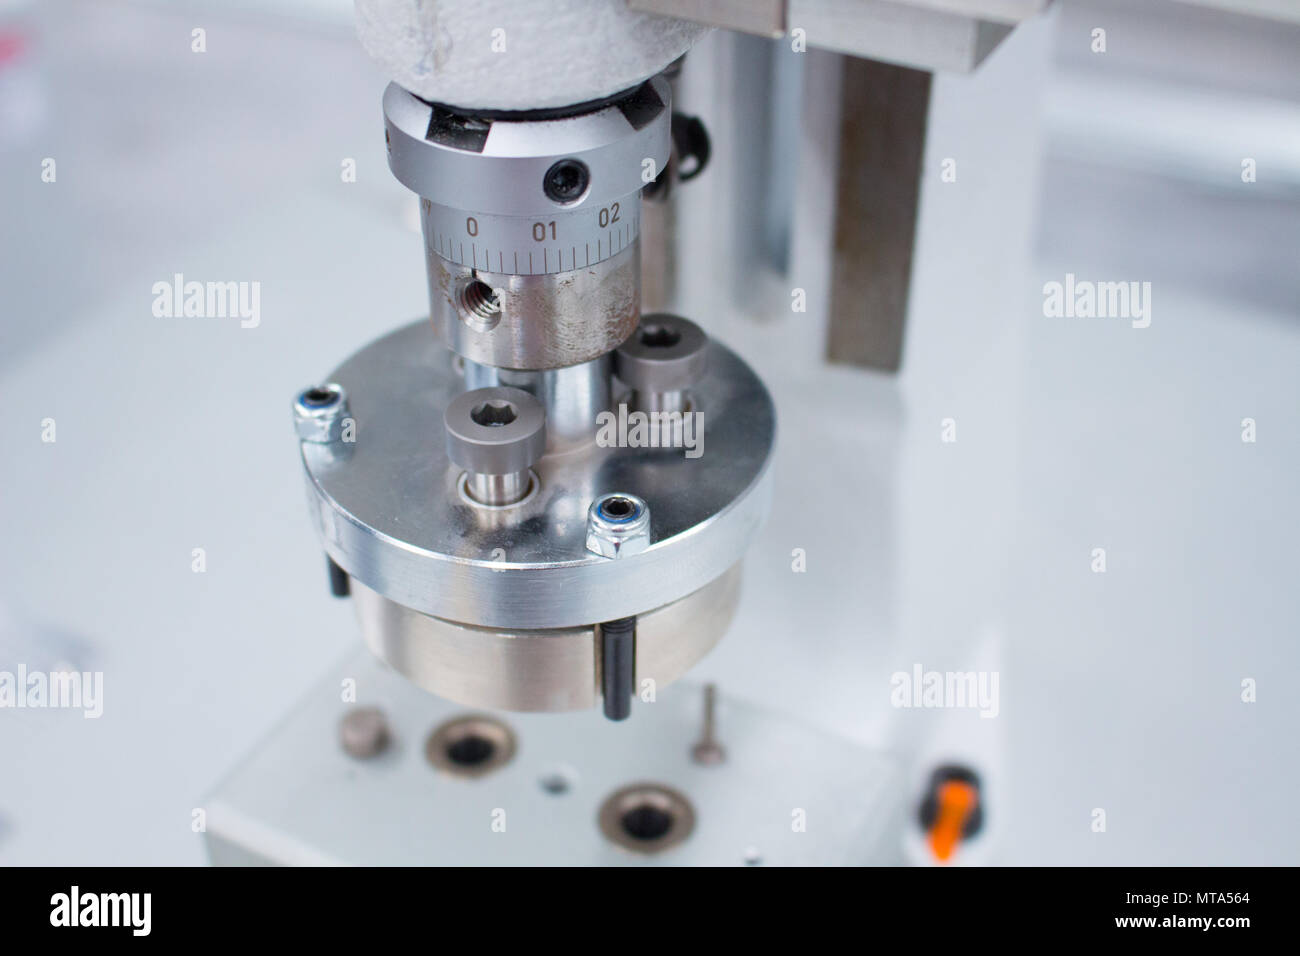 Manual press used to assembly parts in automotive industry Stock Photo